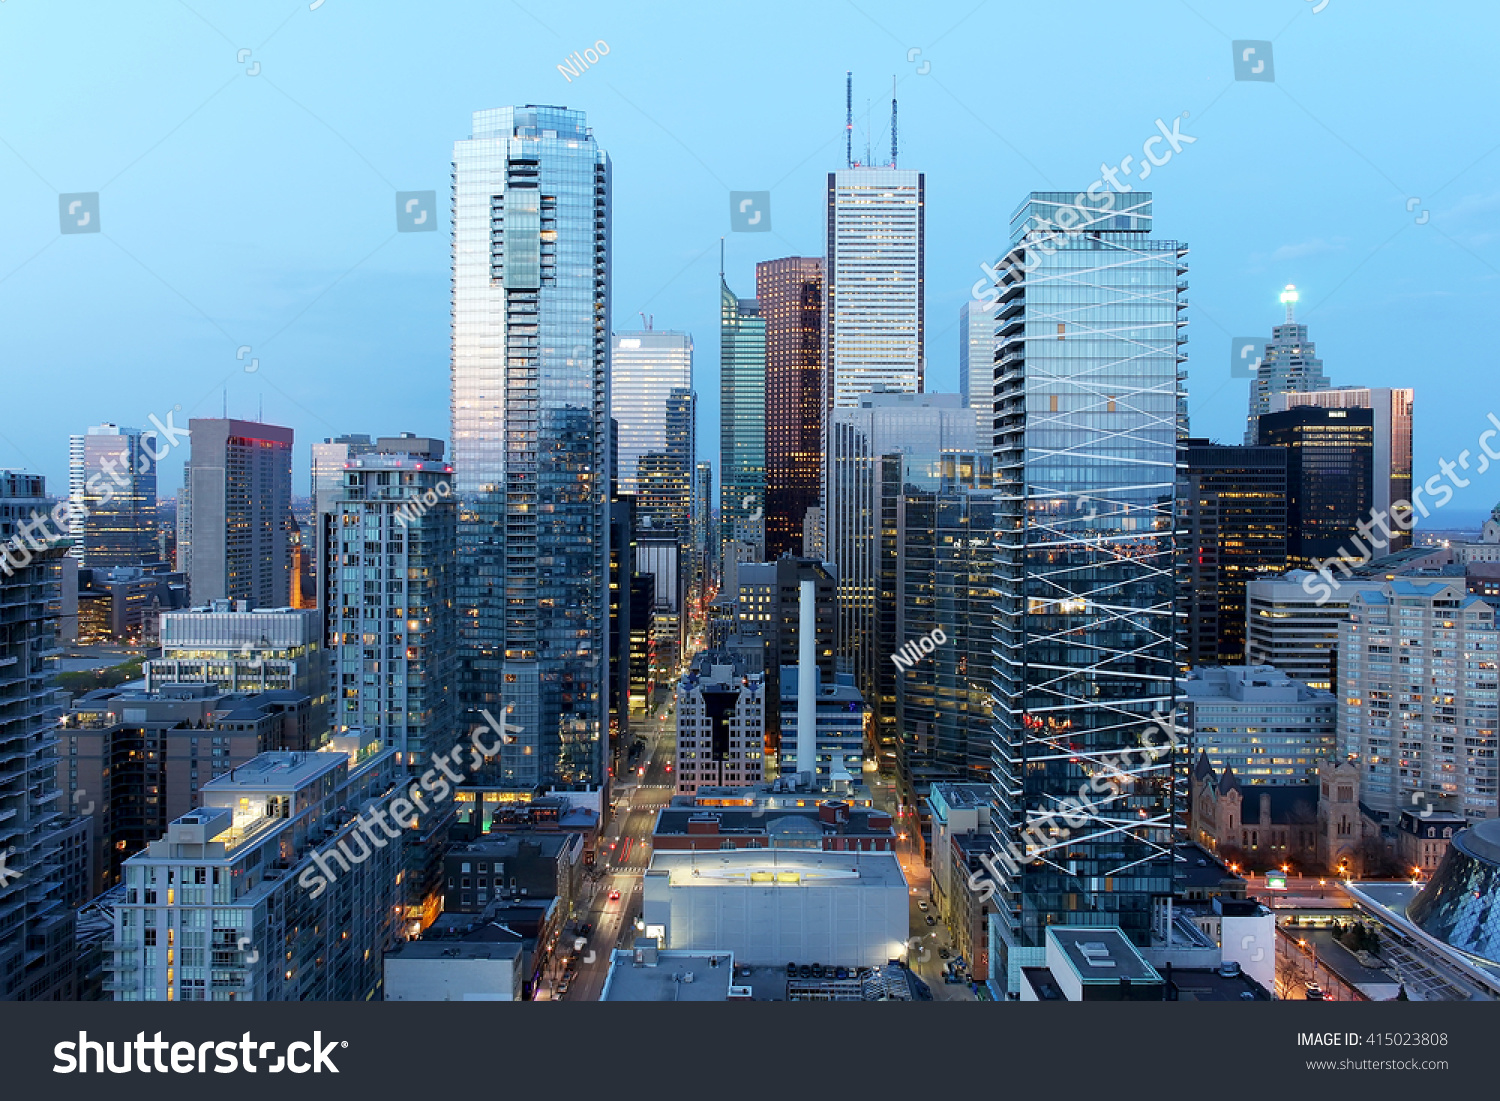 Skyscrapers in downtown Toronto financial district at dusk #415023808